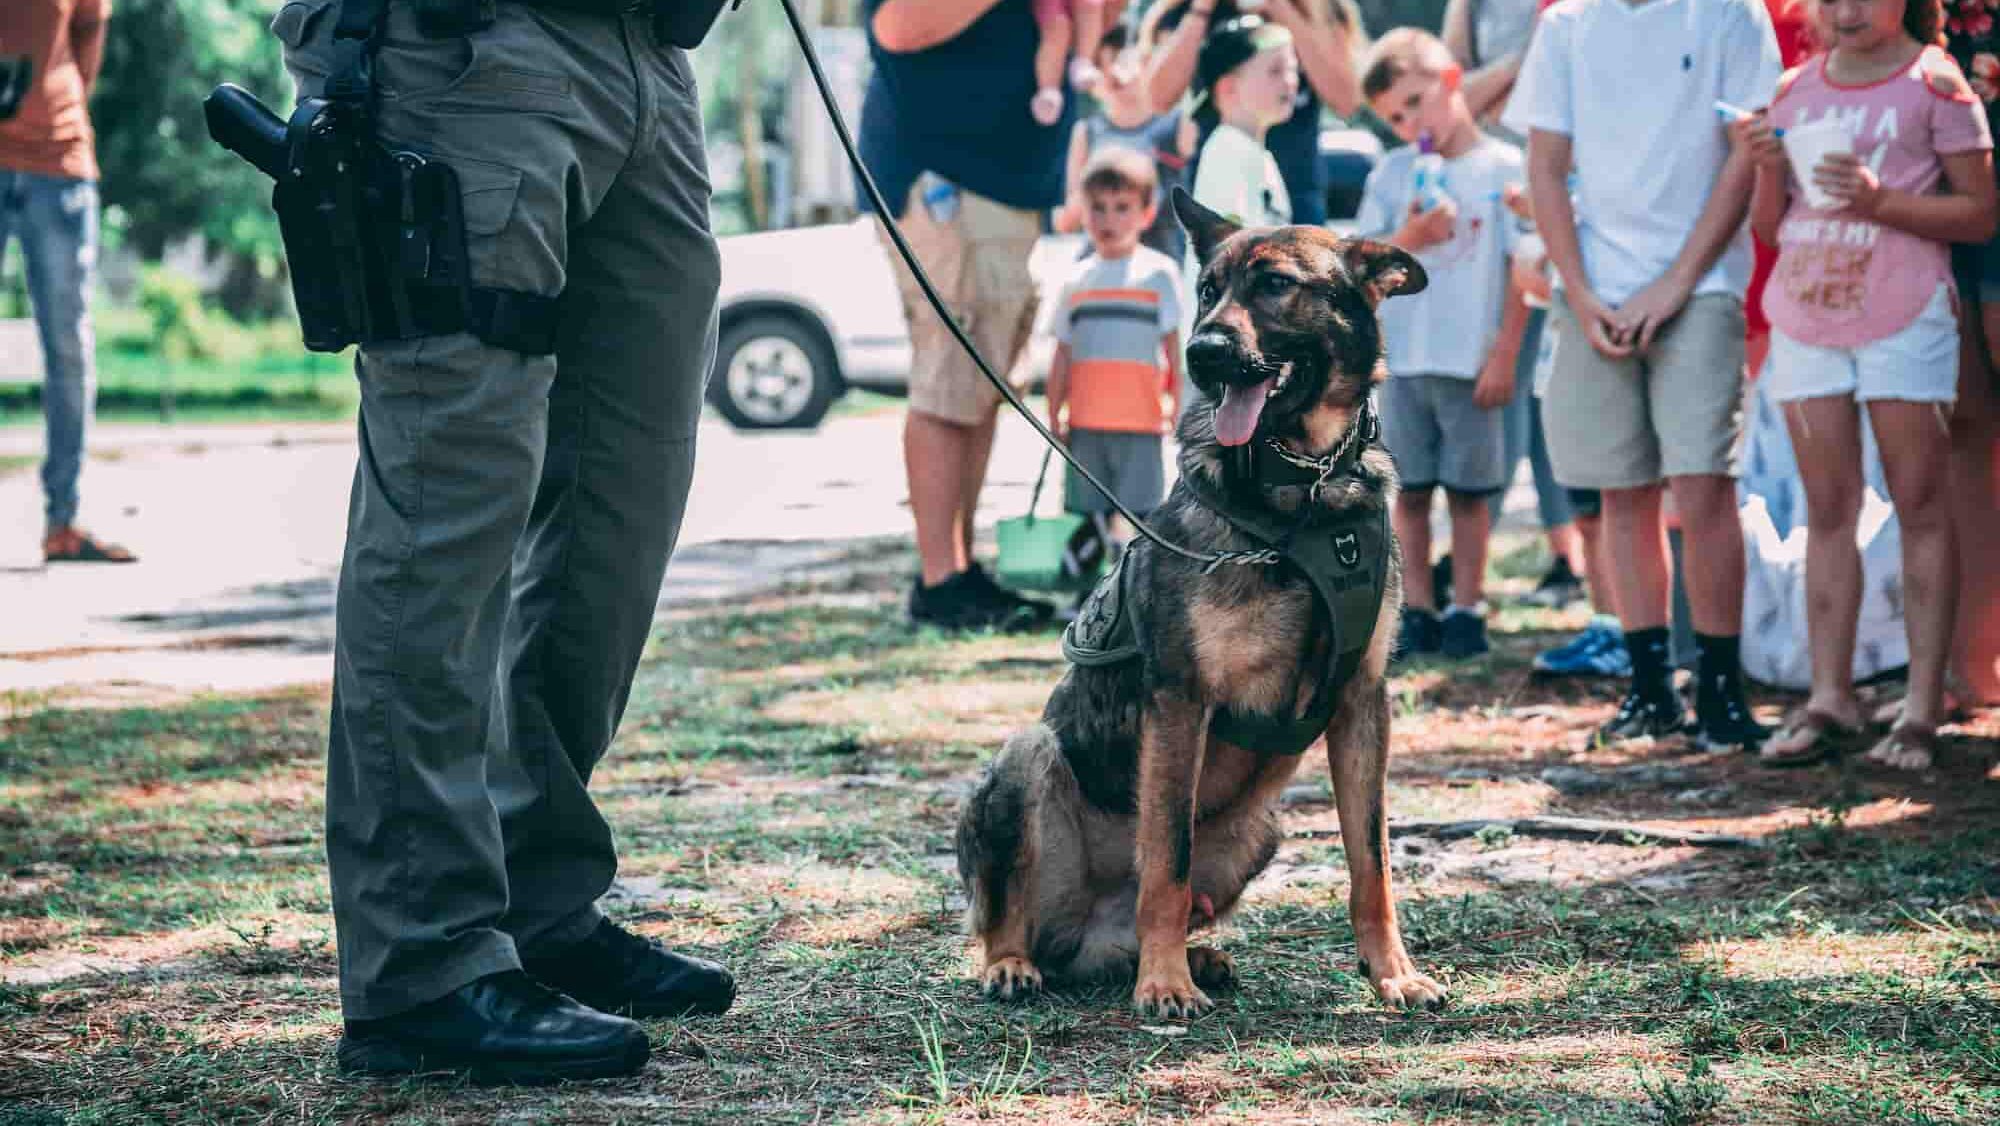 NSW police frequently bring sniffer dogs to pubs, music events and festivals to discourage attendees who may be carrying or consuming illicit drugs